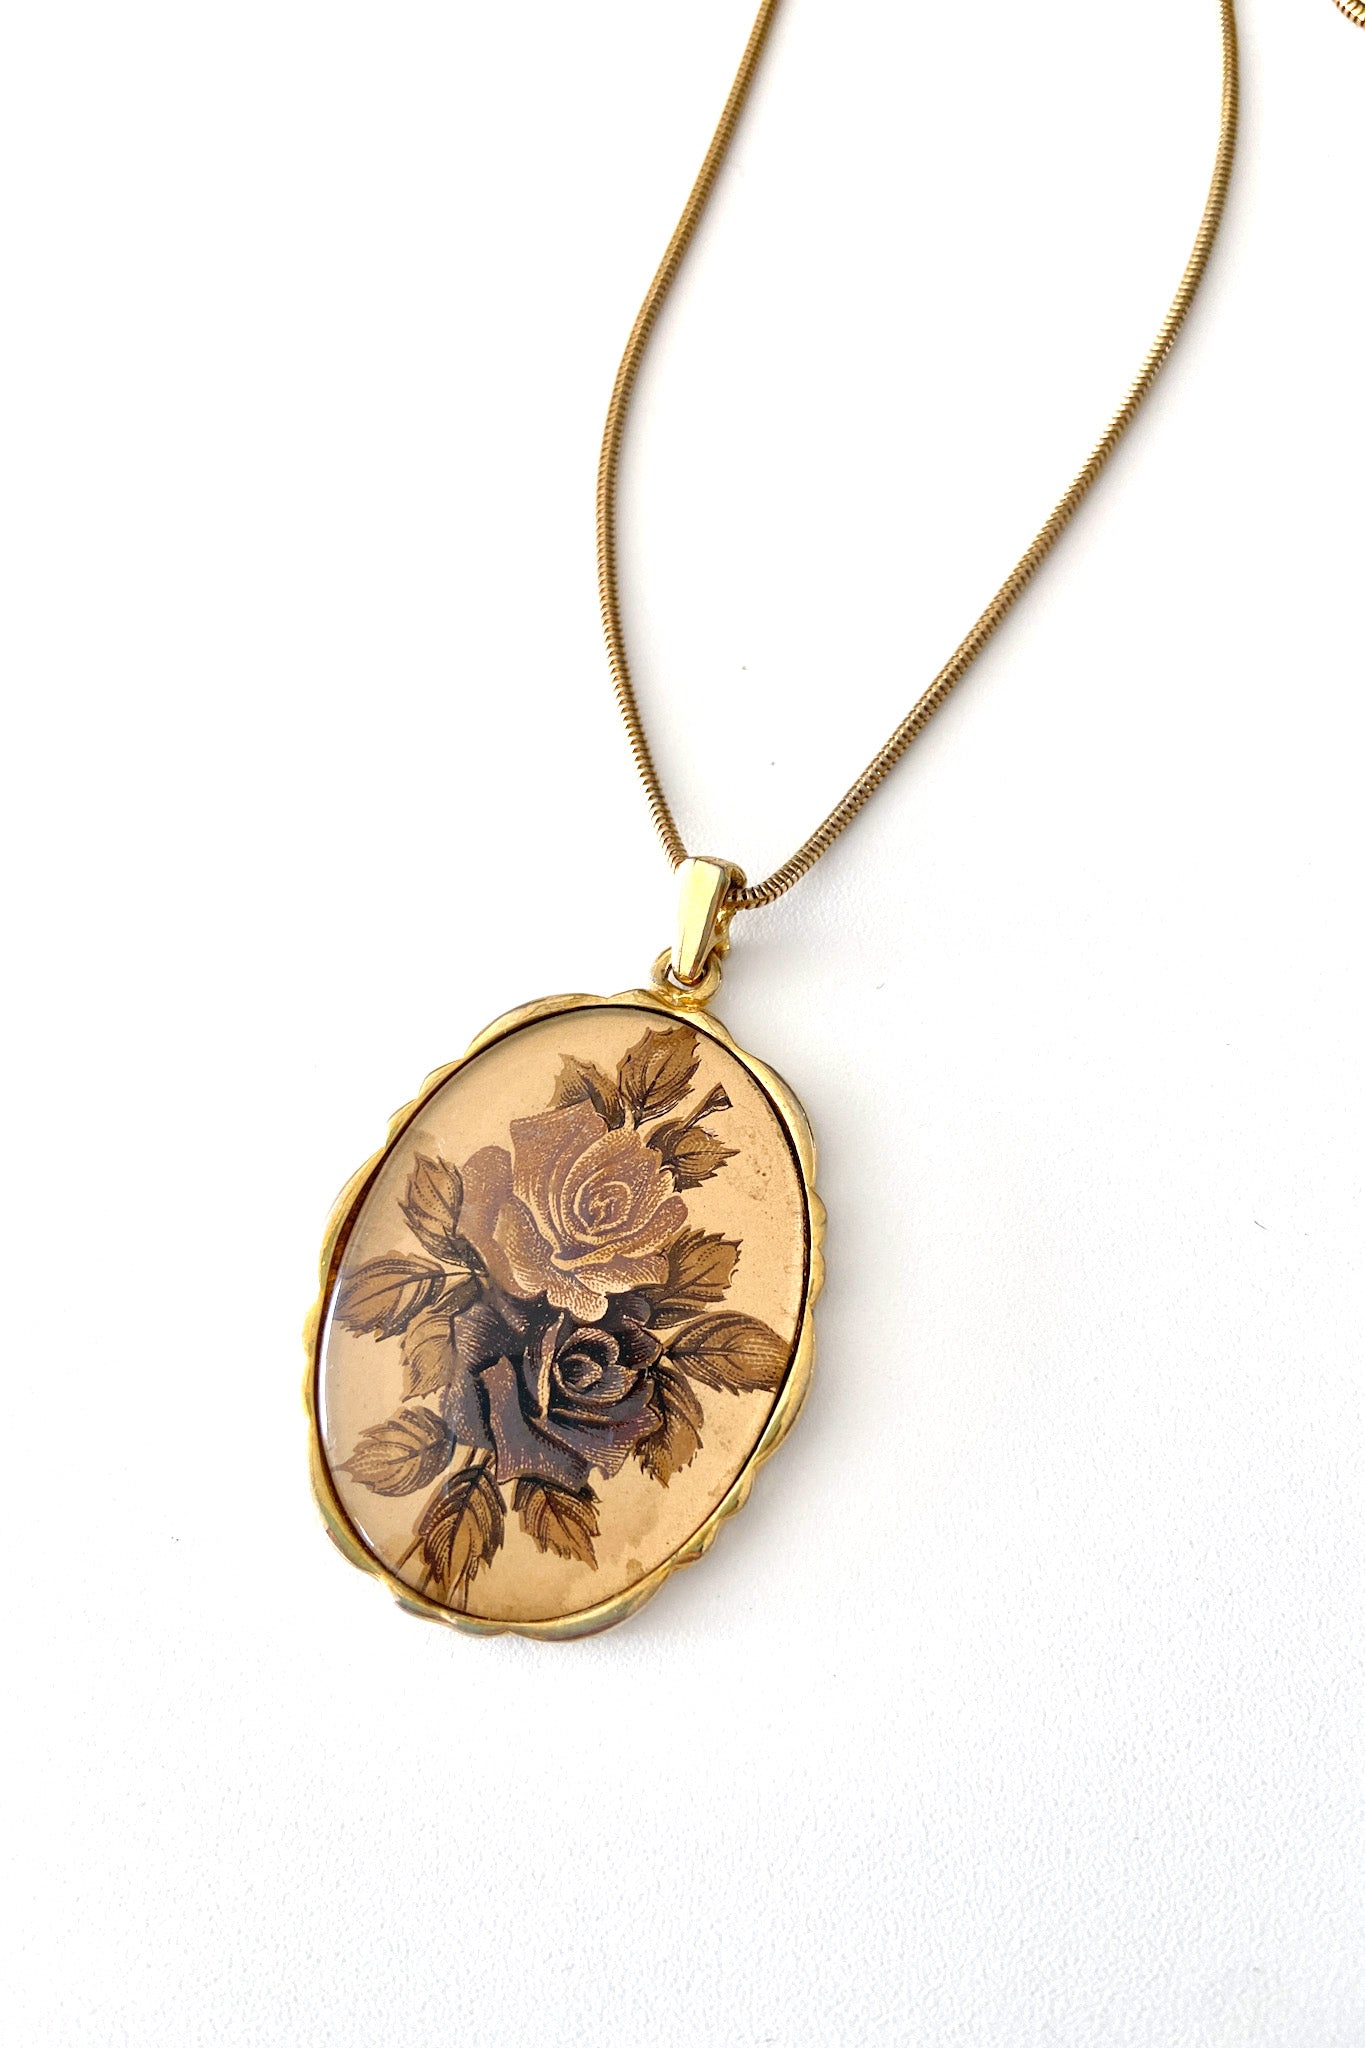 Vintage rose print necklace Beauty and romance